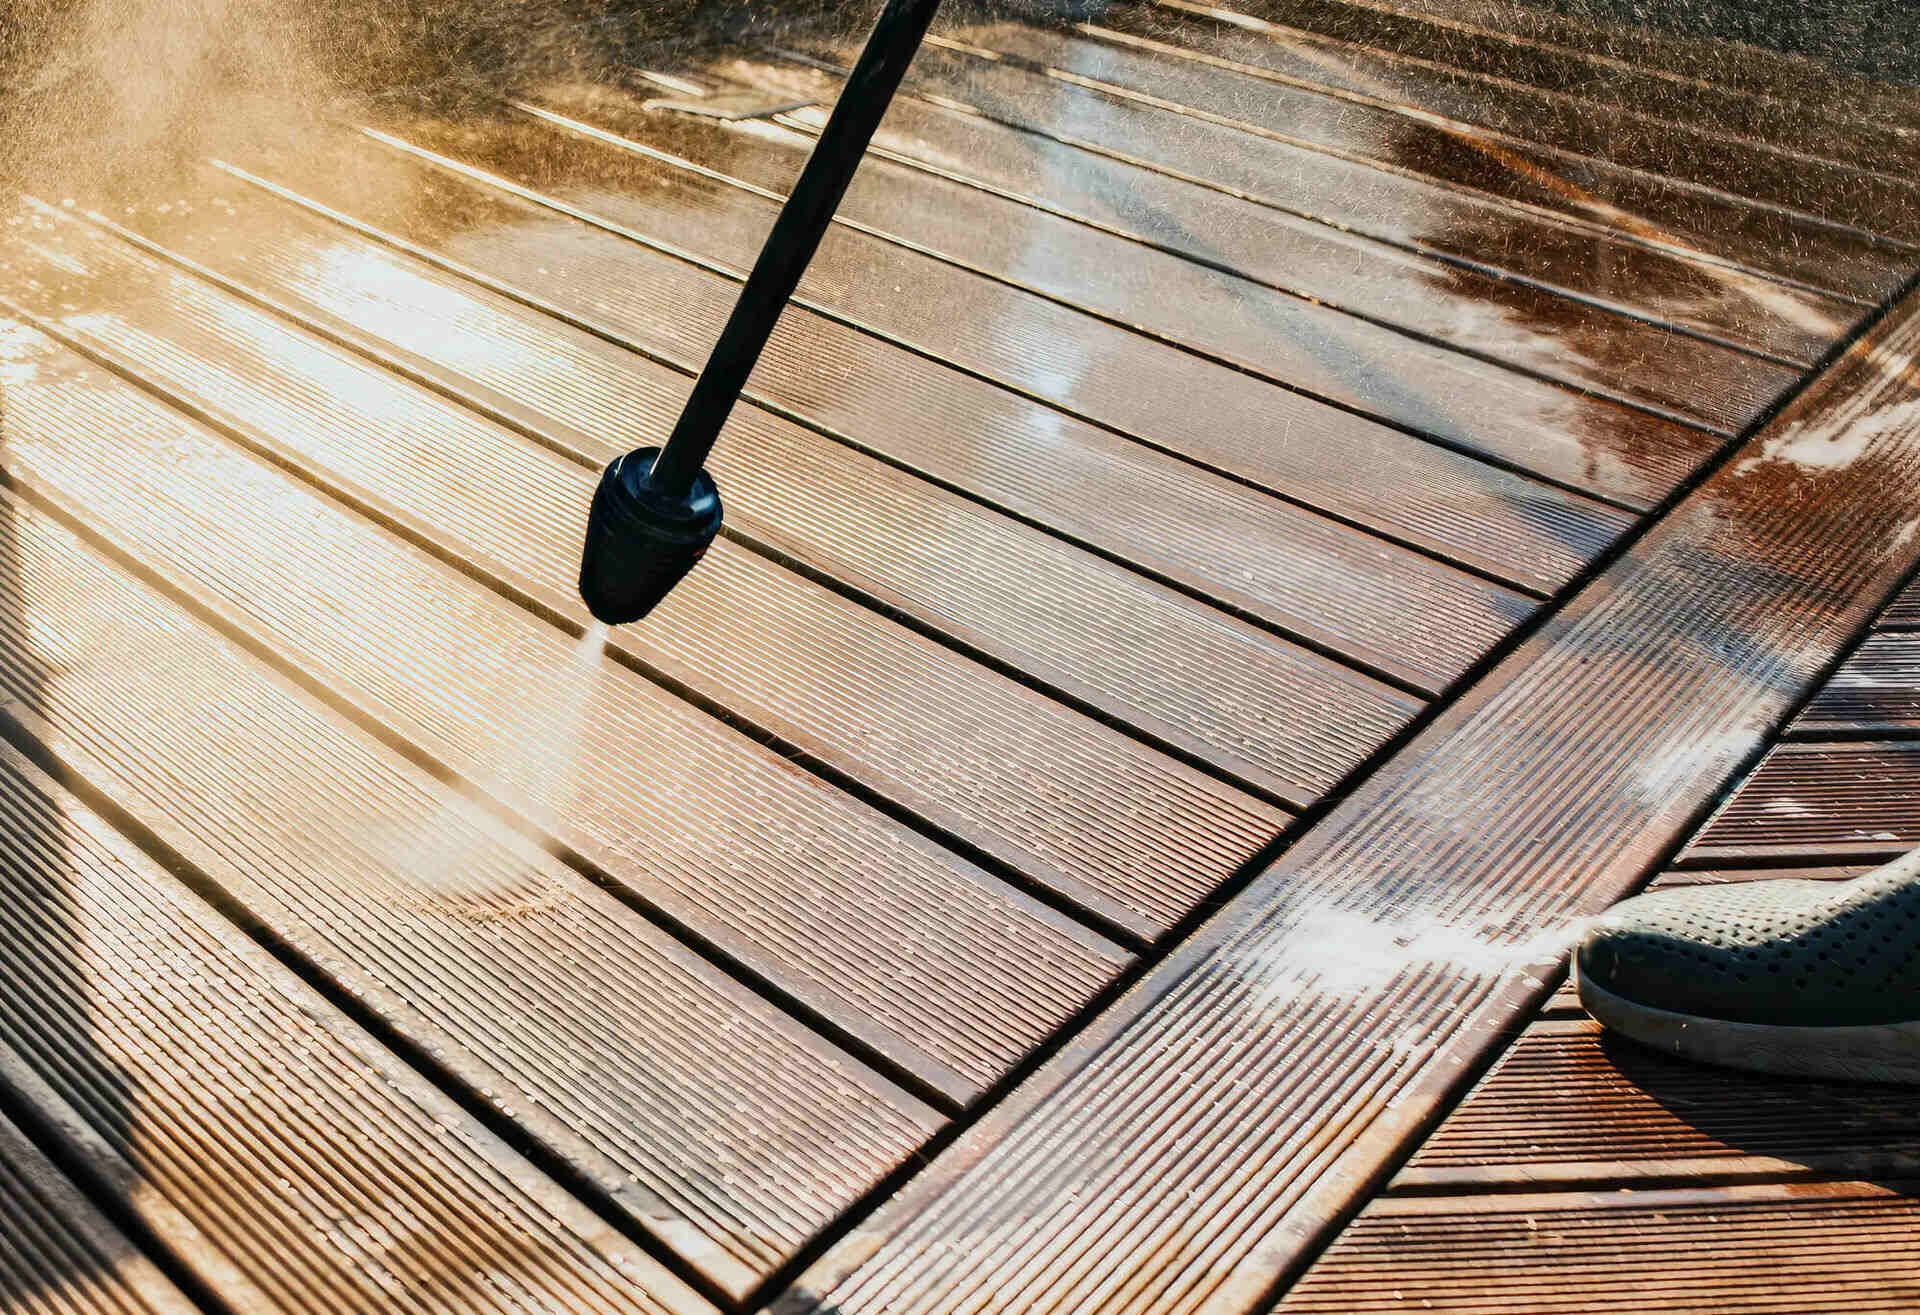 How To Remove Grease Stains From Composite Decking